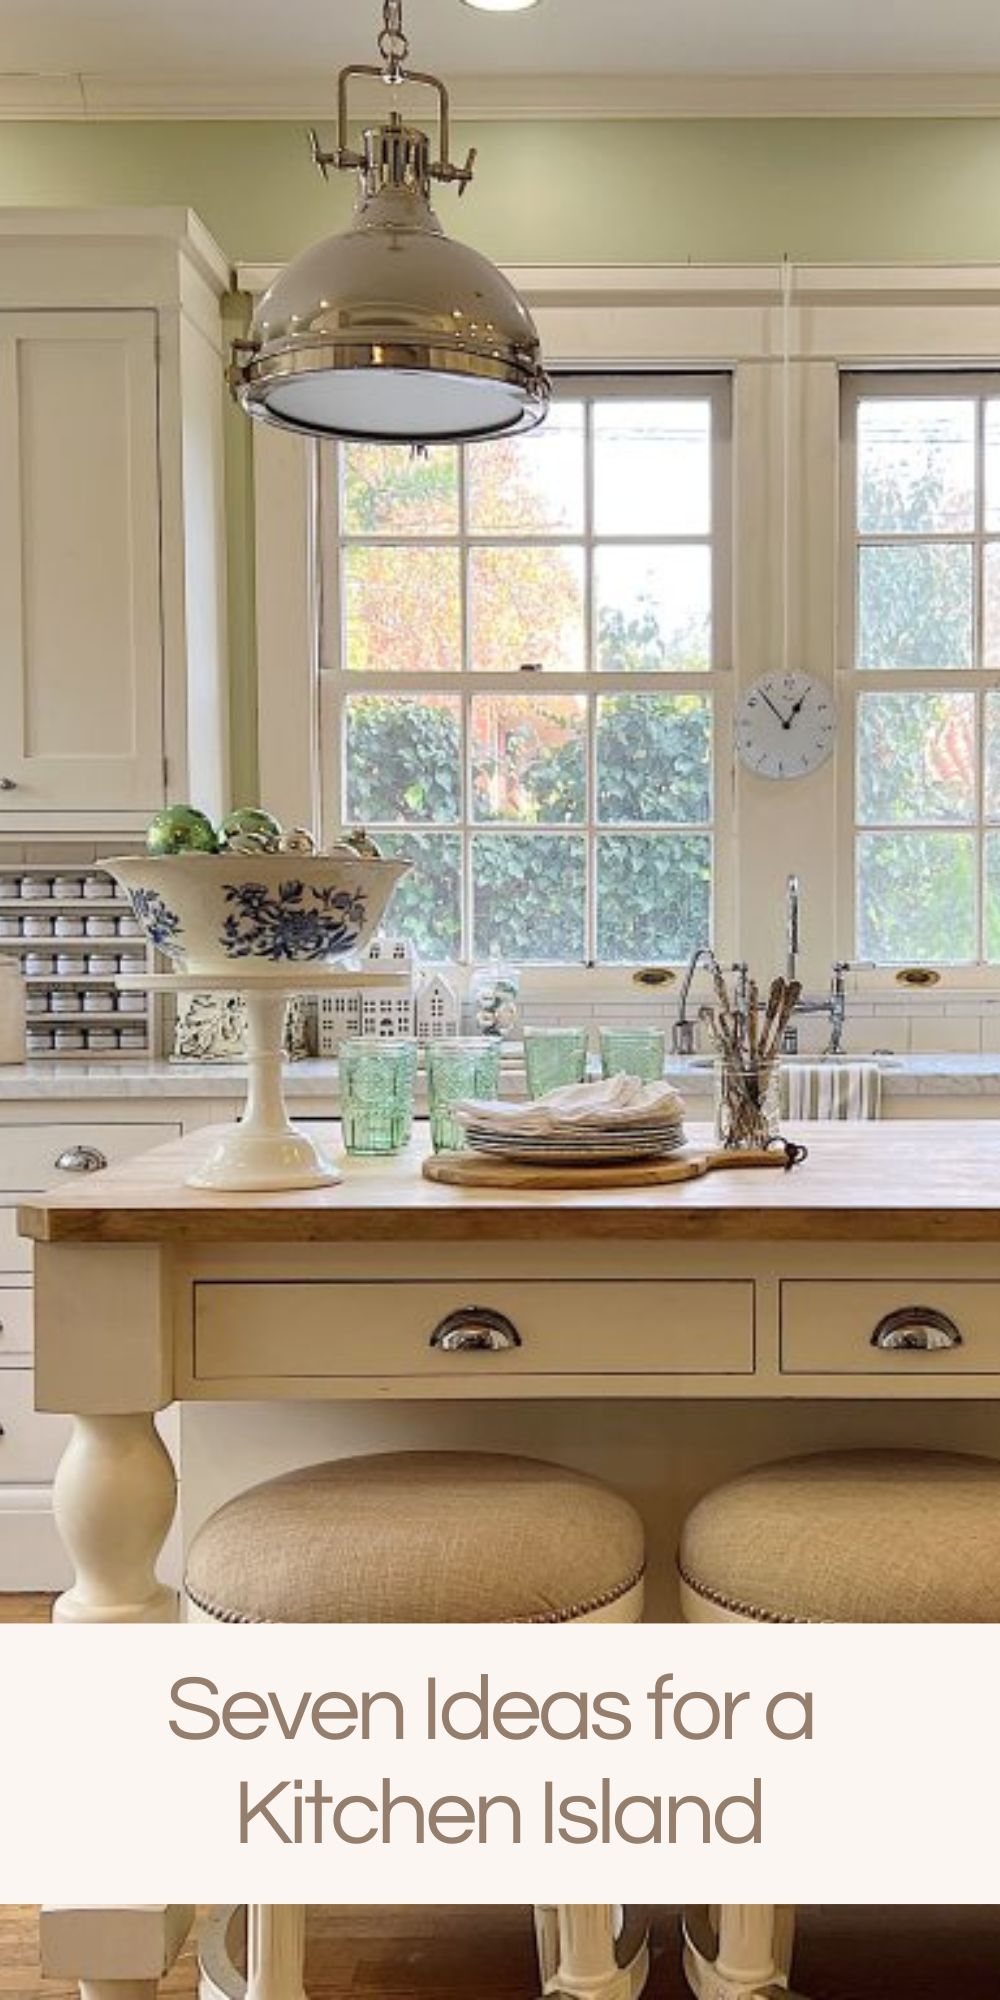 Kitchen Islands are not only practical, but they increase the value of your home. Today I am sharing my white kitchen island and seven ideas for yours.